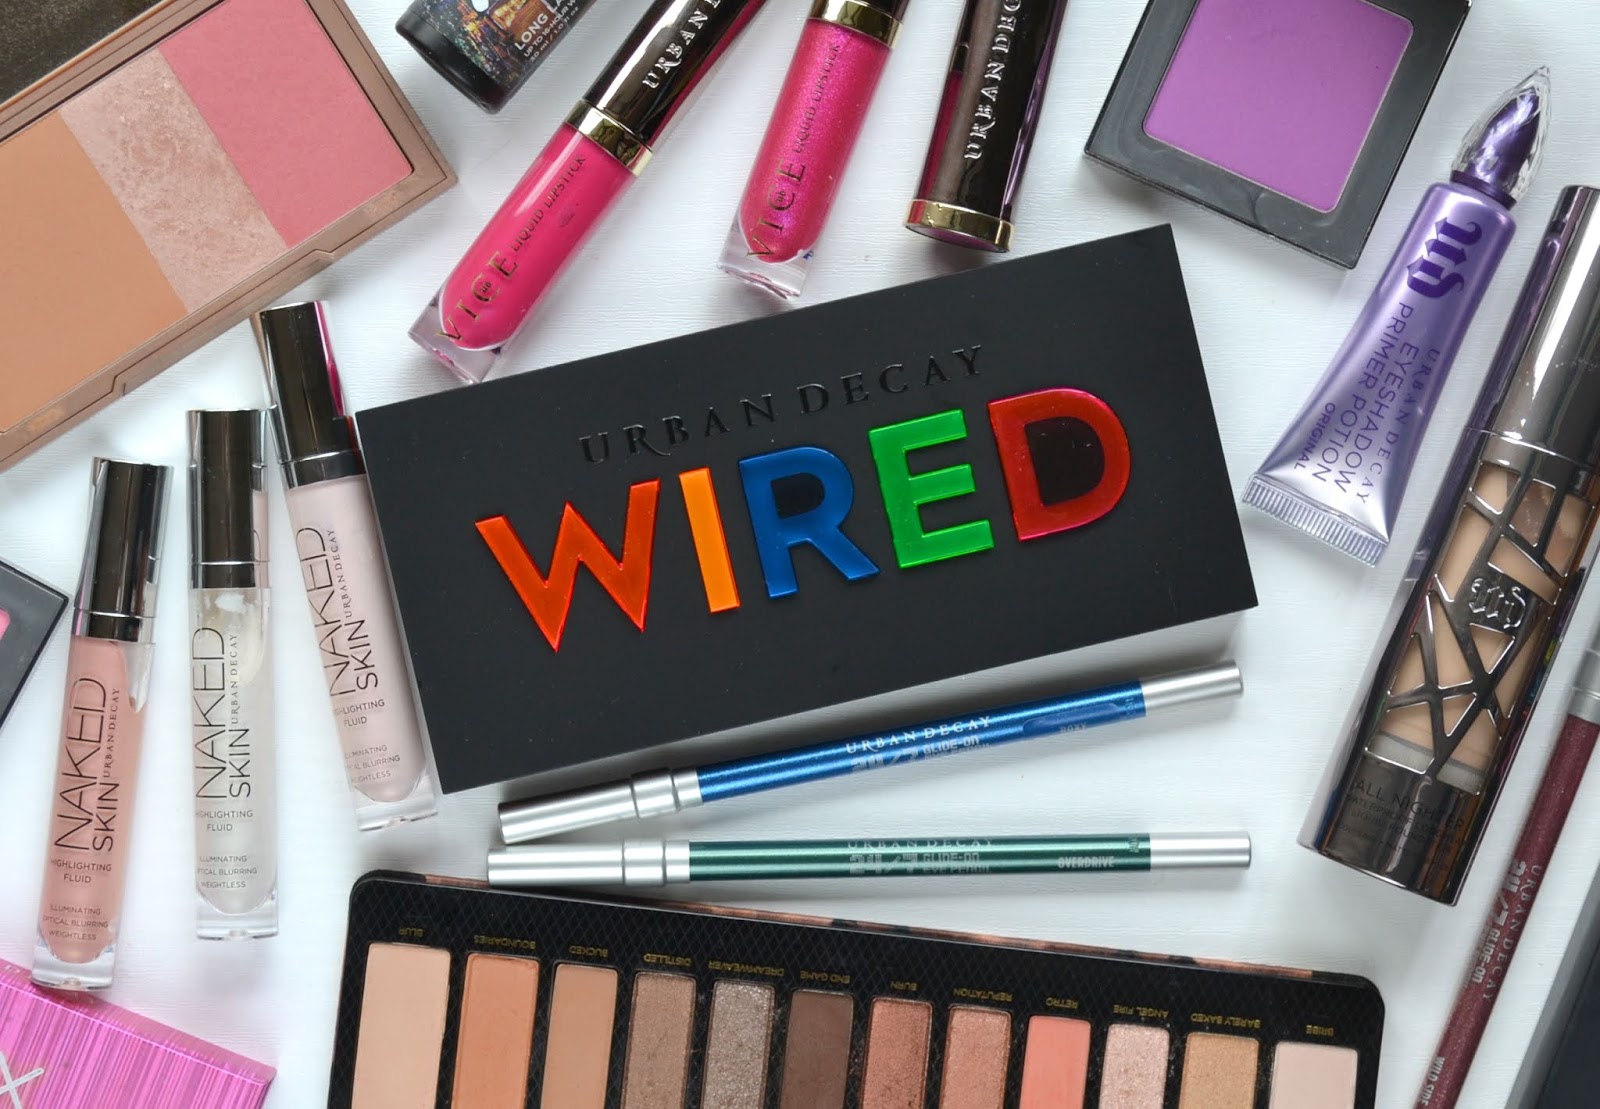 MAKEUP, The Urban Decay Wired Palette: The Trials, Errors and Successes, Cosmetic Proof